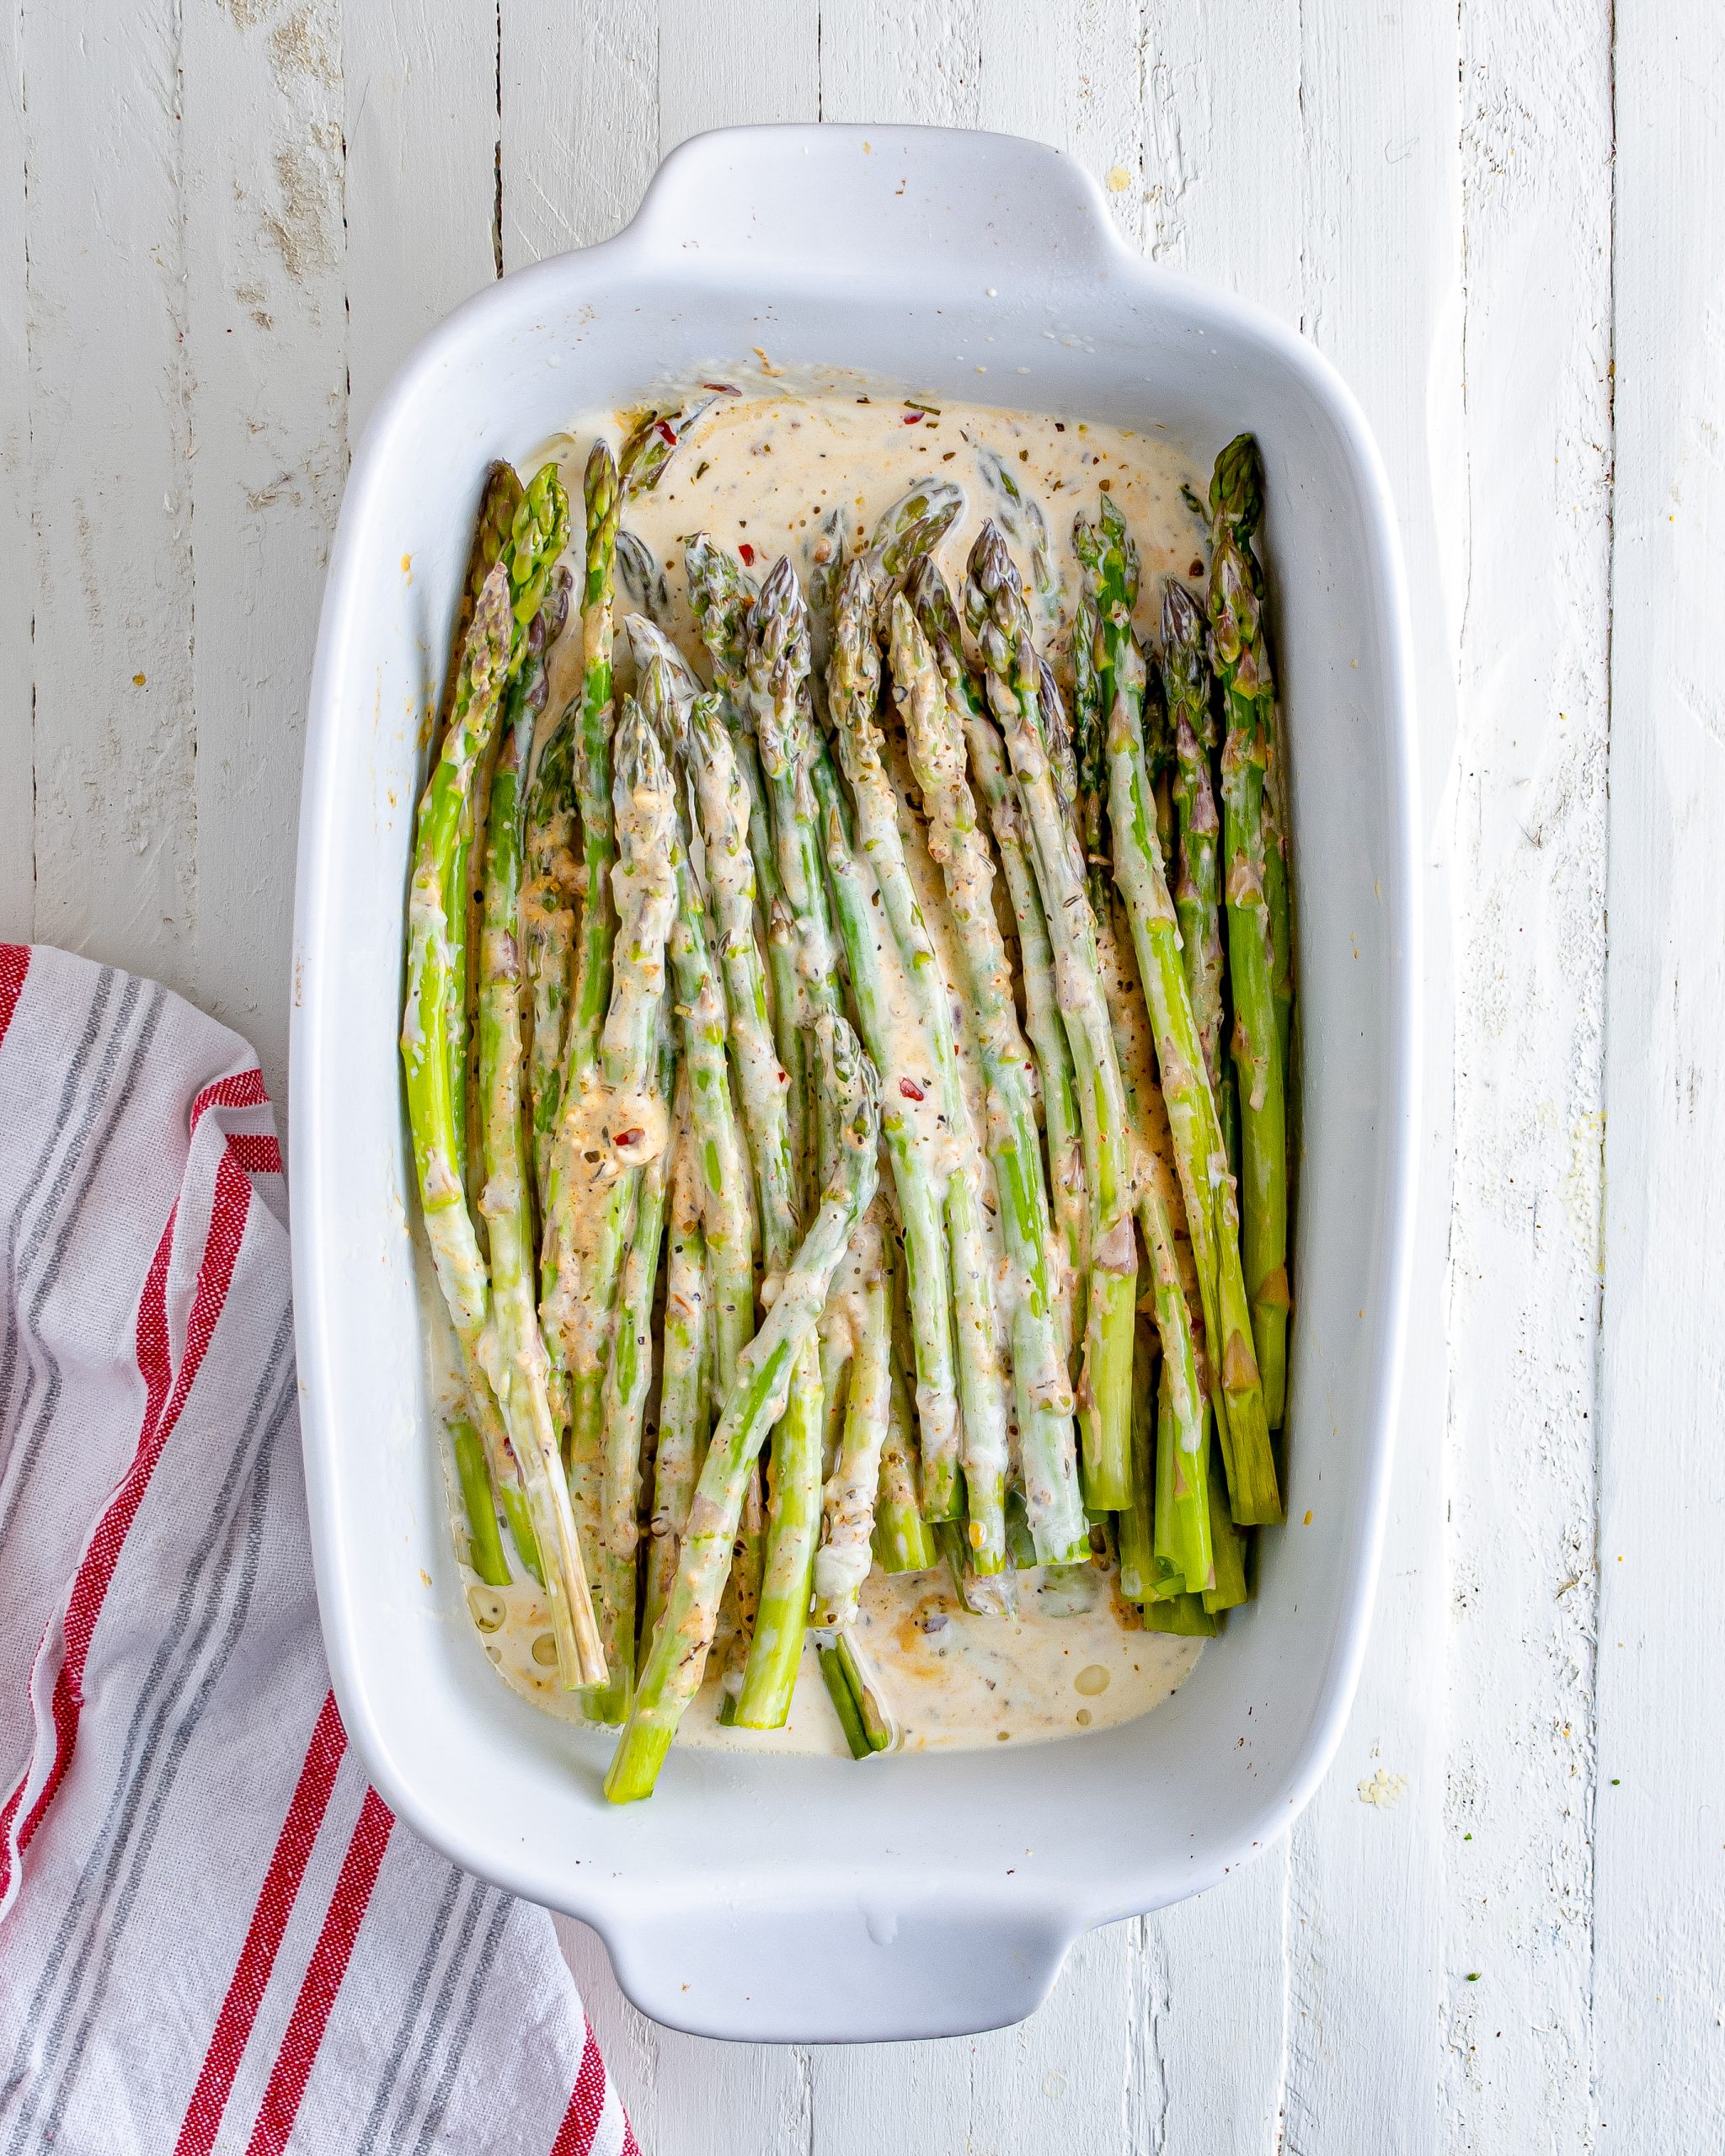 Layer the asparagus in a well-greased 9x13 baking dish, and top with the sauce. 